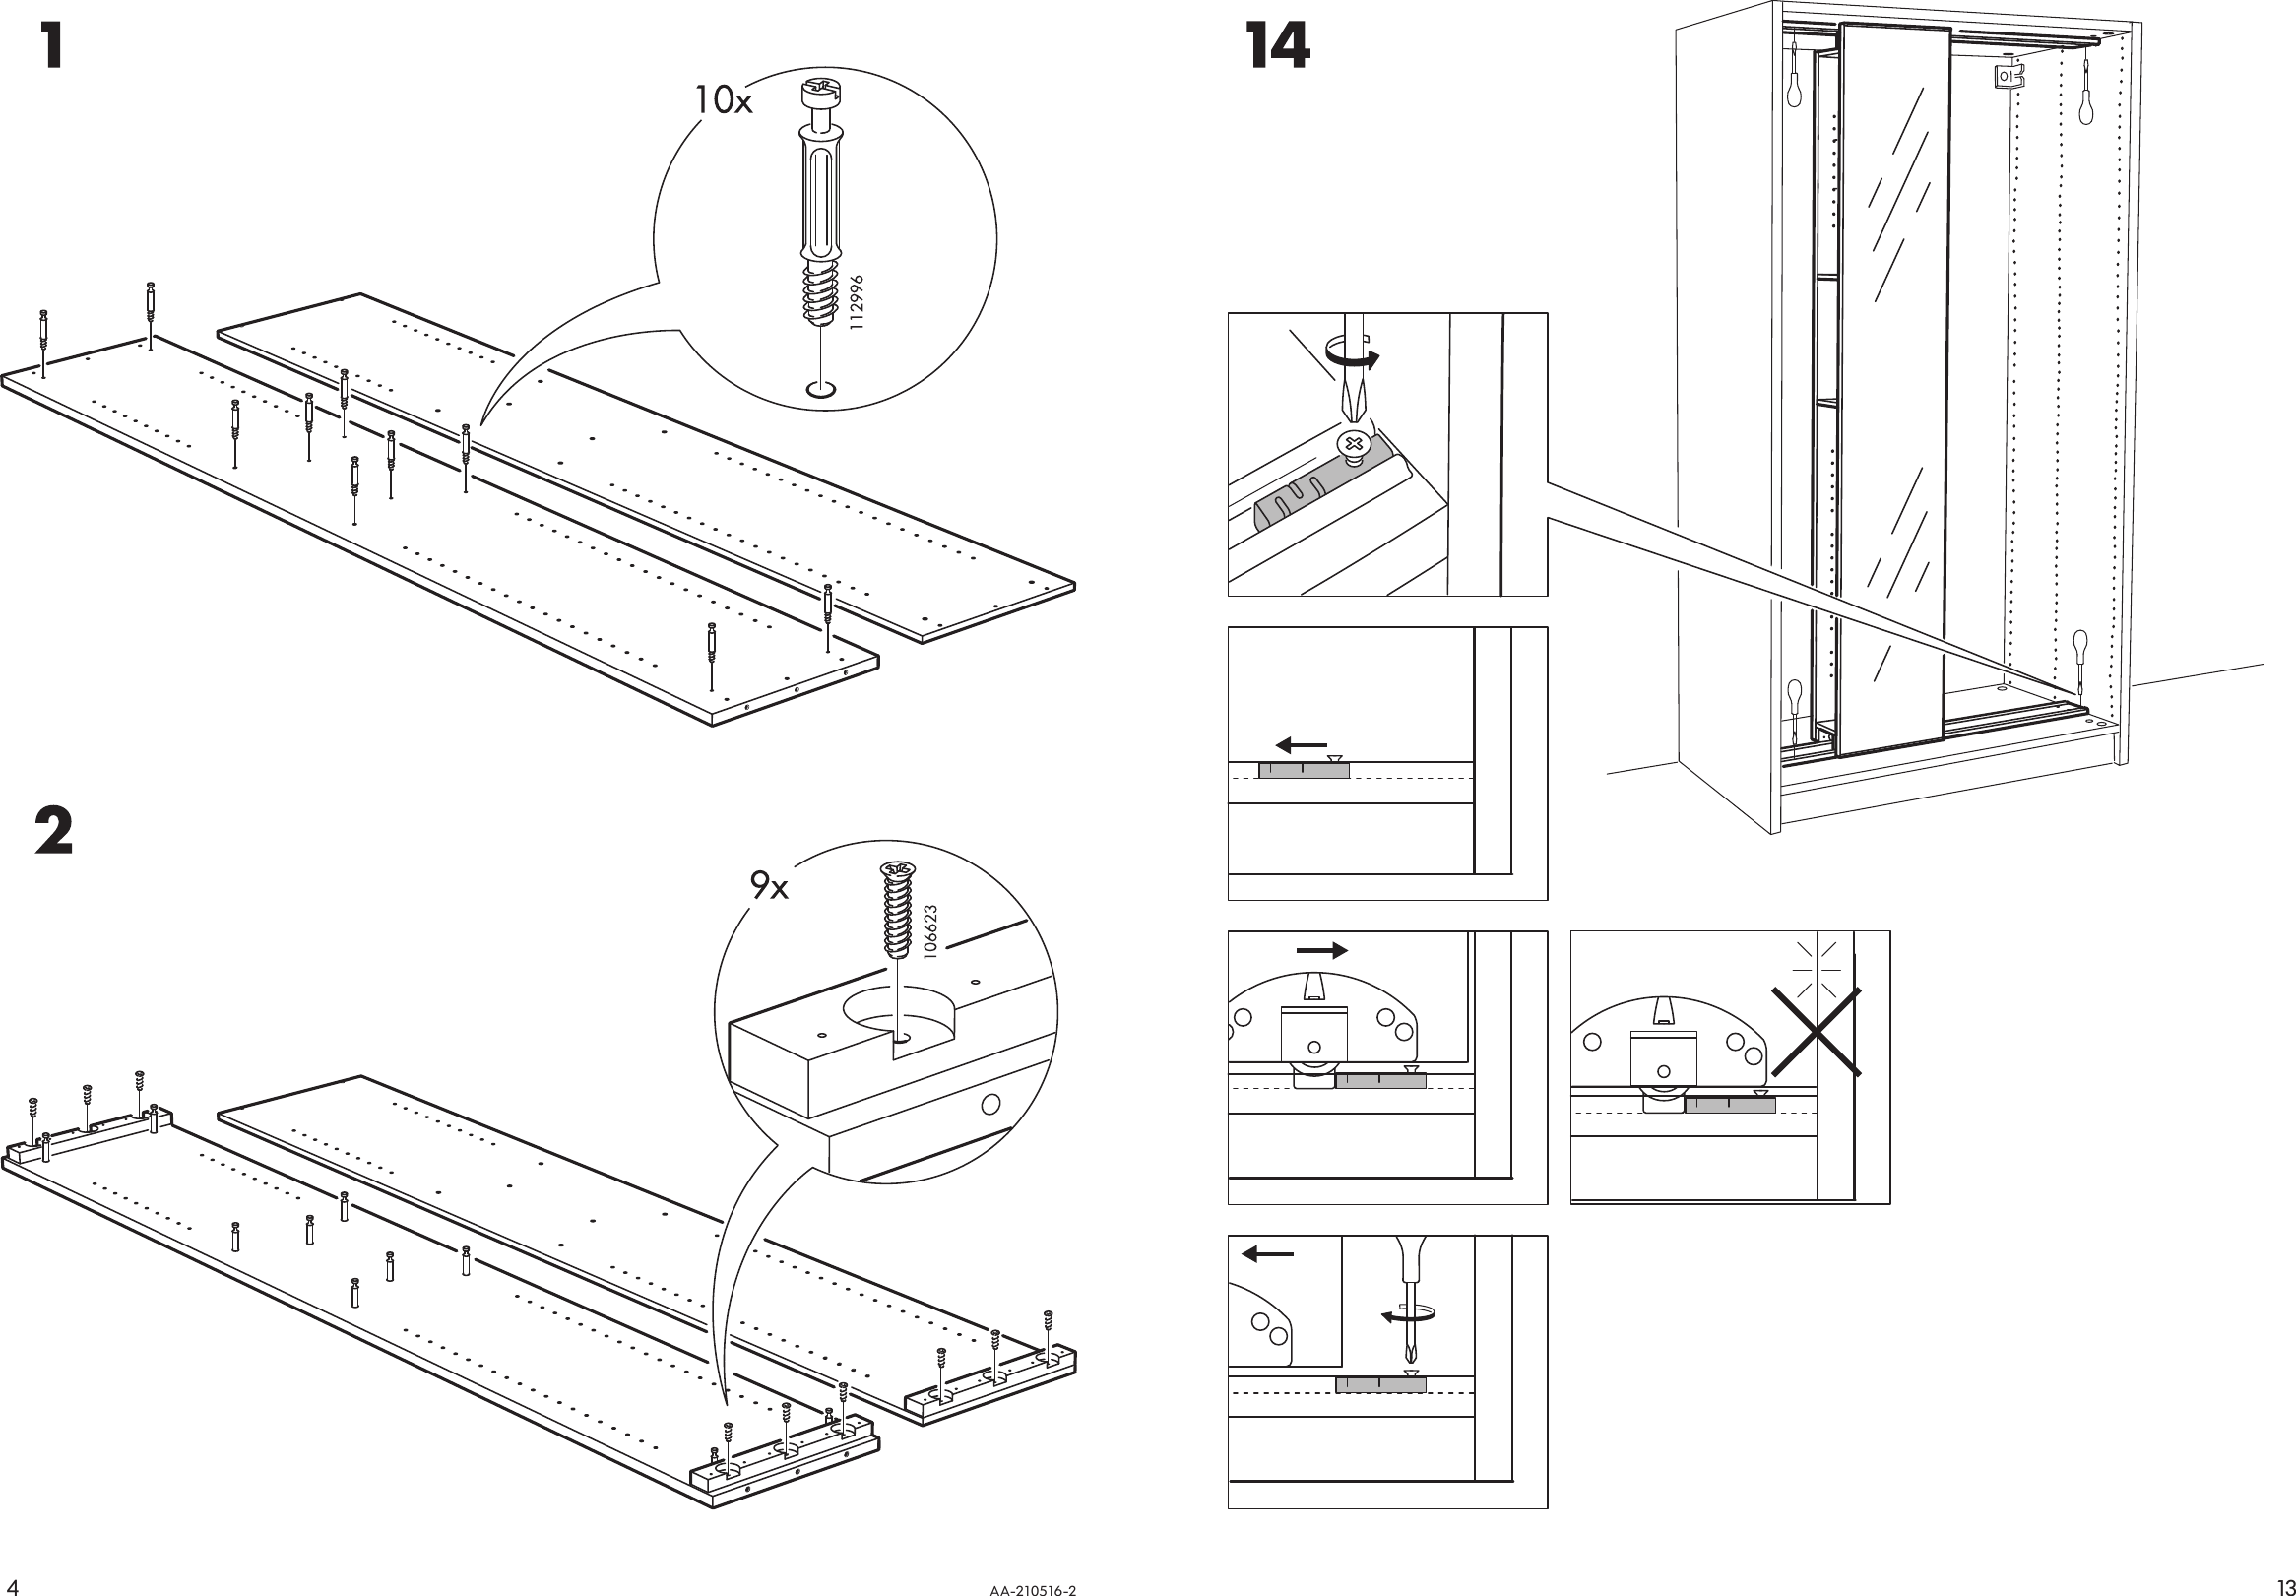 Page 4 of 8 - Ikea Ikea-Komplement-Mirrored-Storage-Unit-92-7-8-Assembly-Instruction